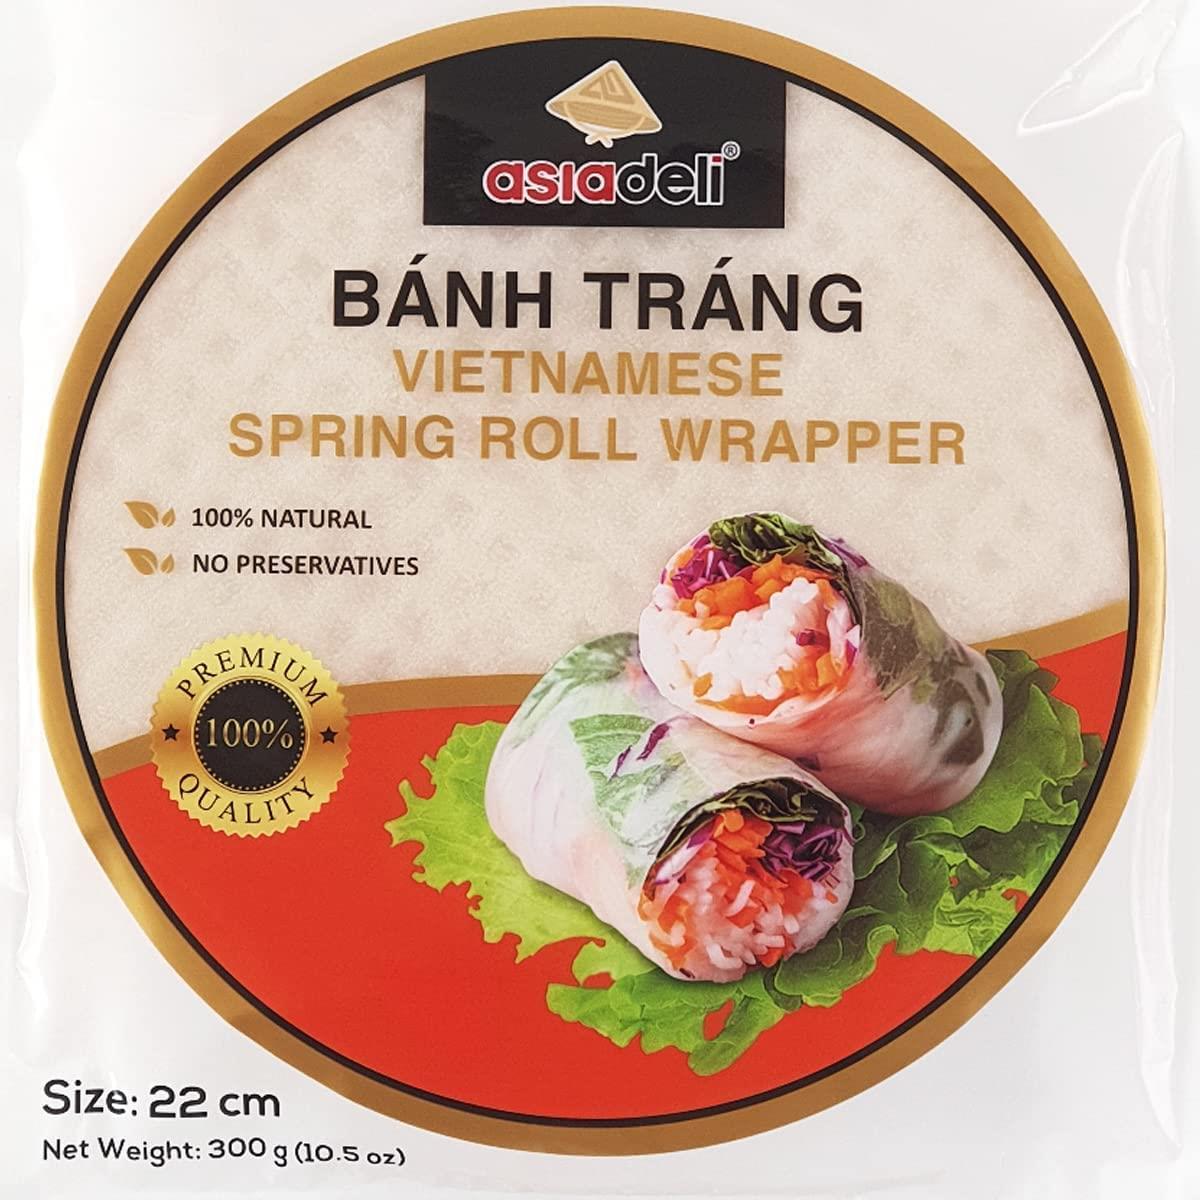 150 Sheets Premium Rice Papers, 30~32 Sheets Per Pack, 10.5 oz, Vietnamese Spring Roll Wrapper, Premium Rice Paper, Round 22cm by Asiadeli(Pack of 5)